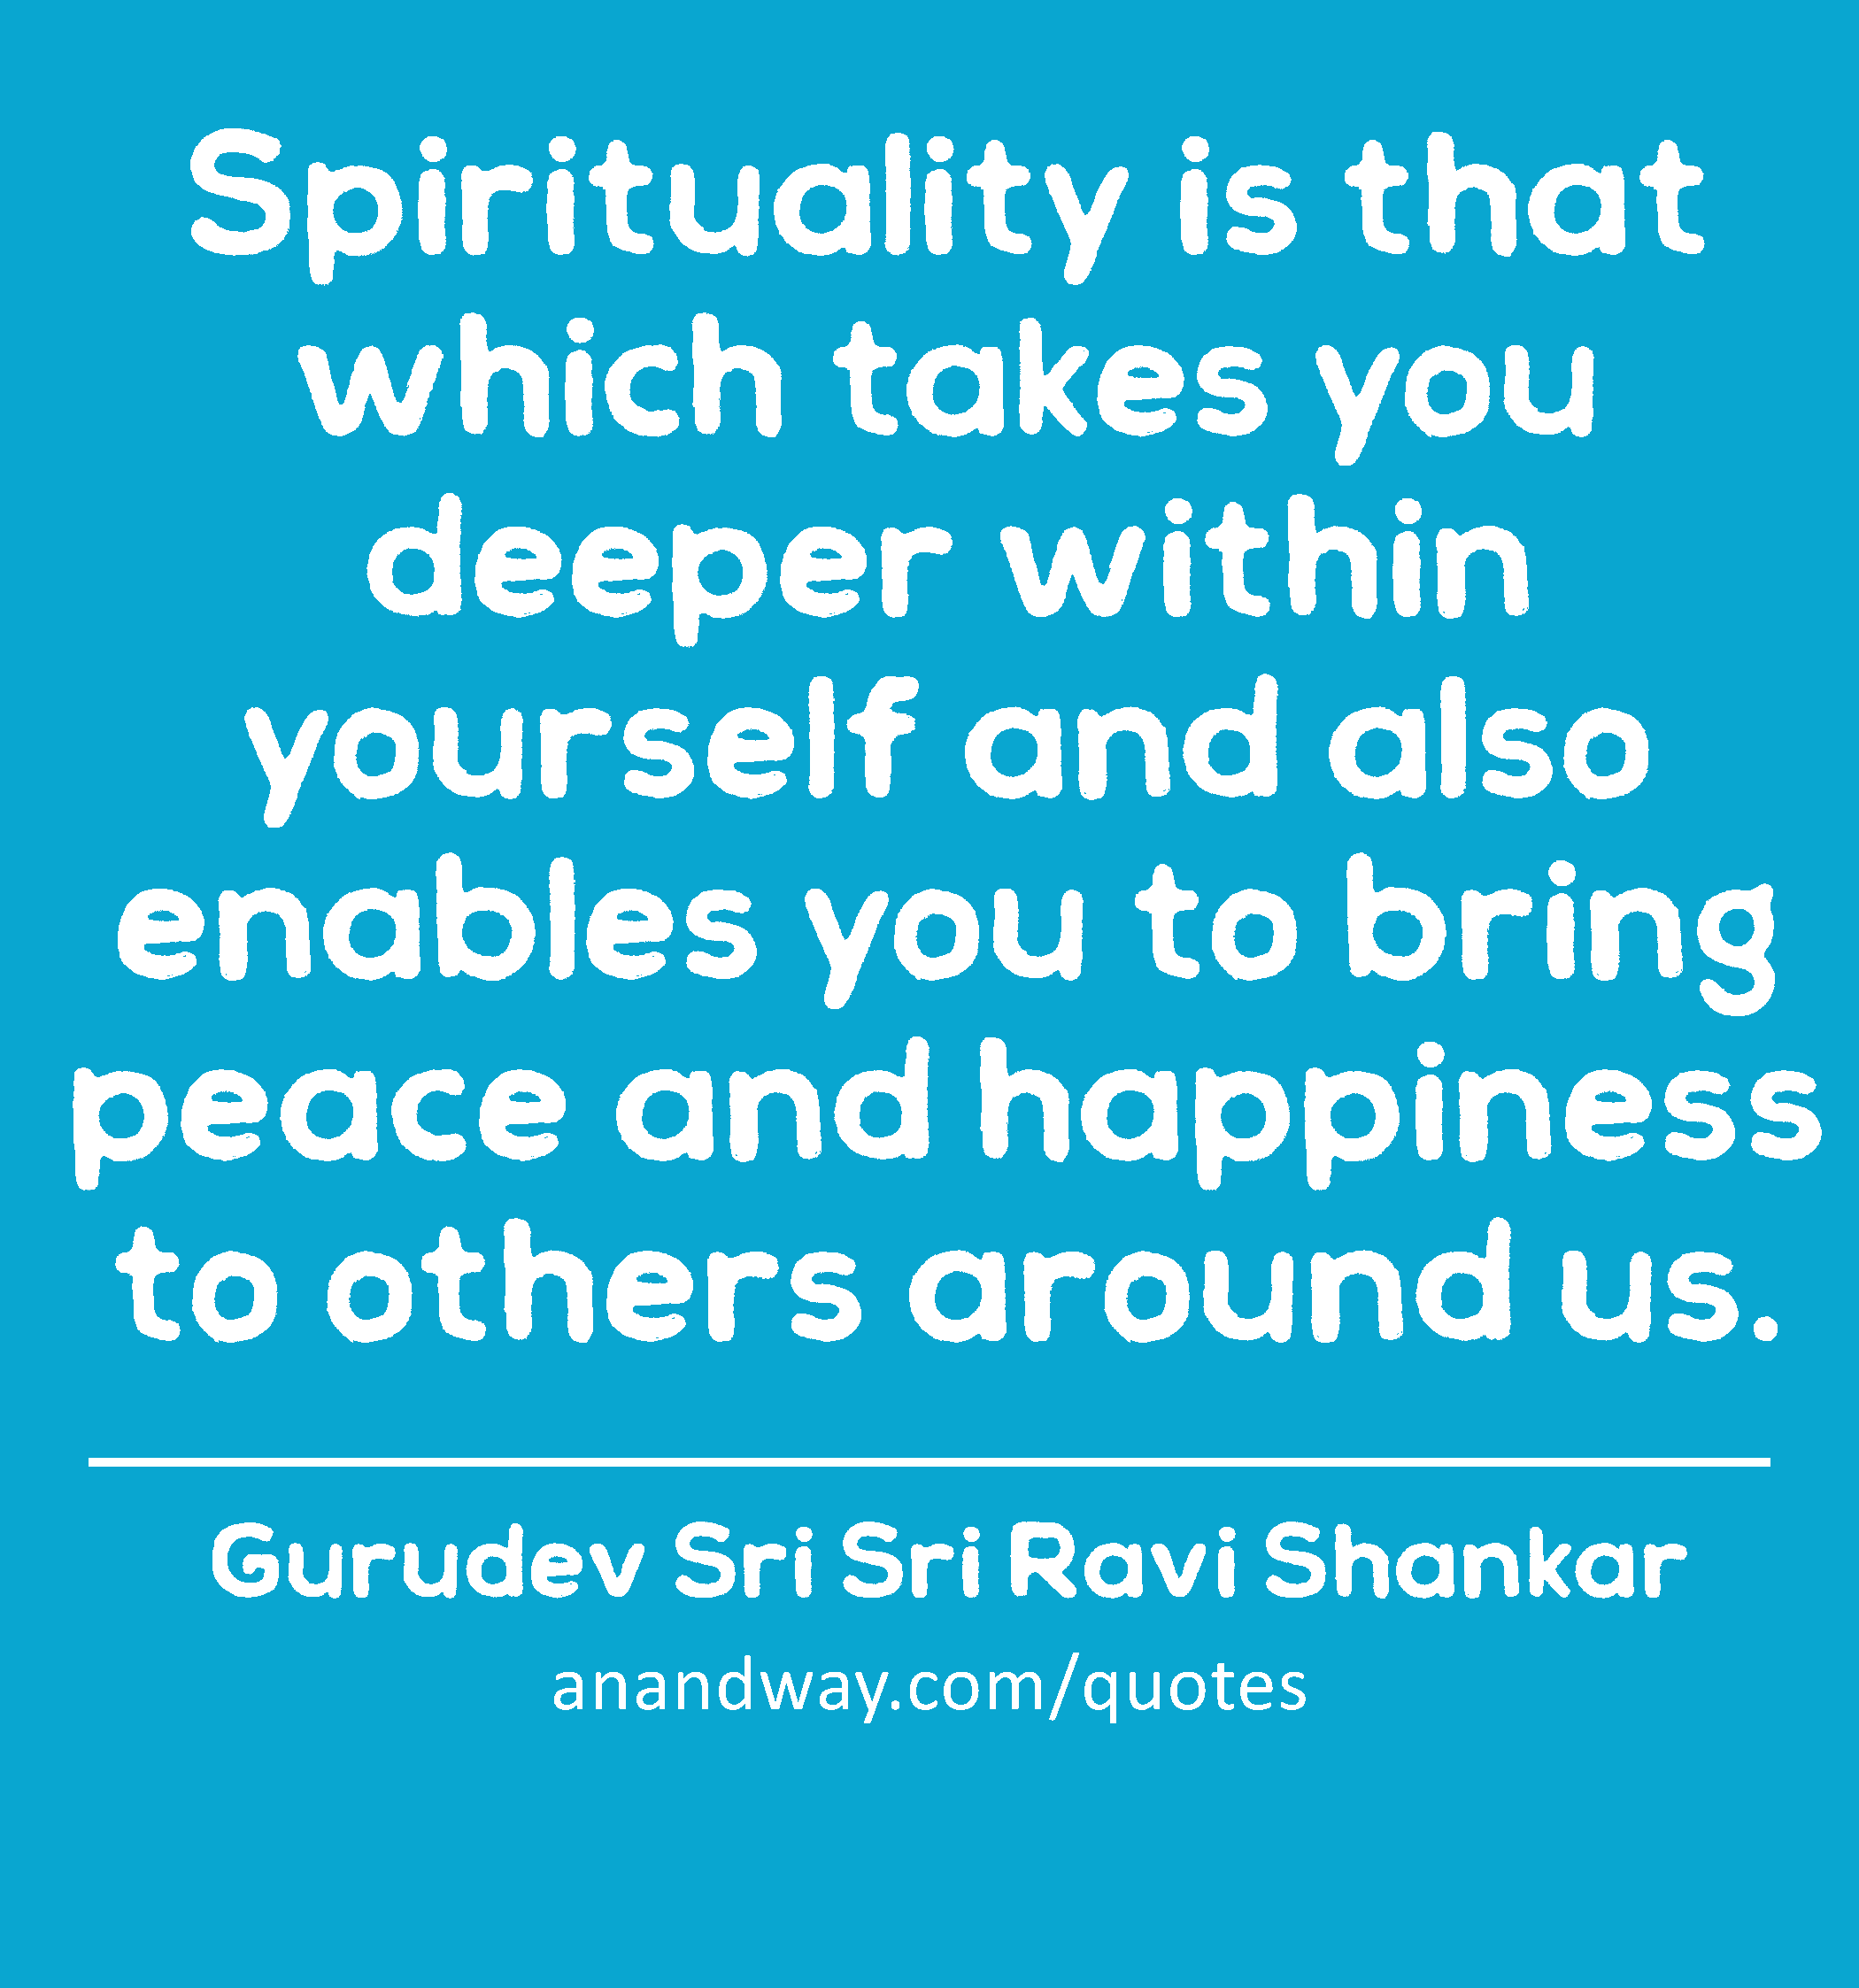 Spirituality is that which takes you deeper within yourself and also enables you to bring peace and
 -Gurudev Sri Sri Ravi Shankar